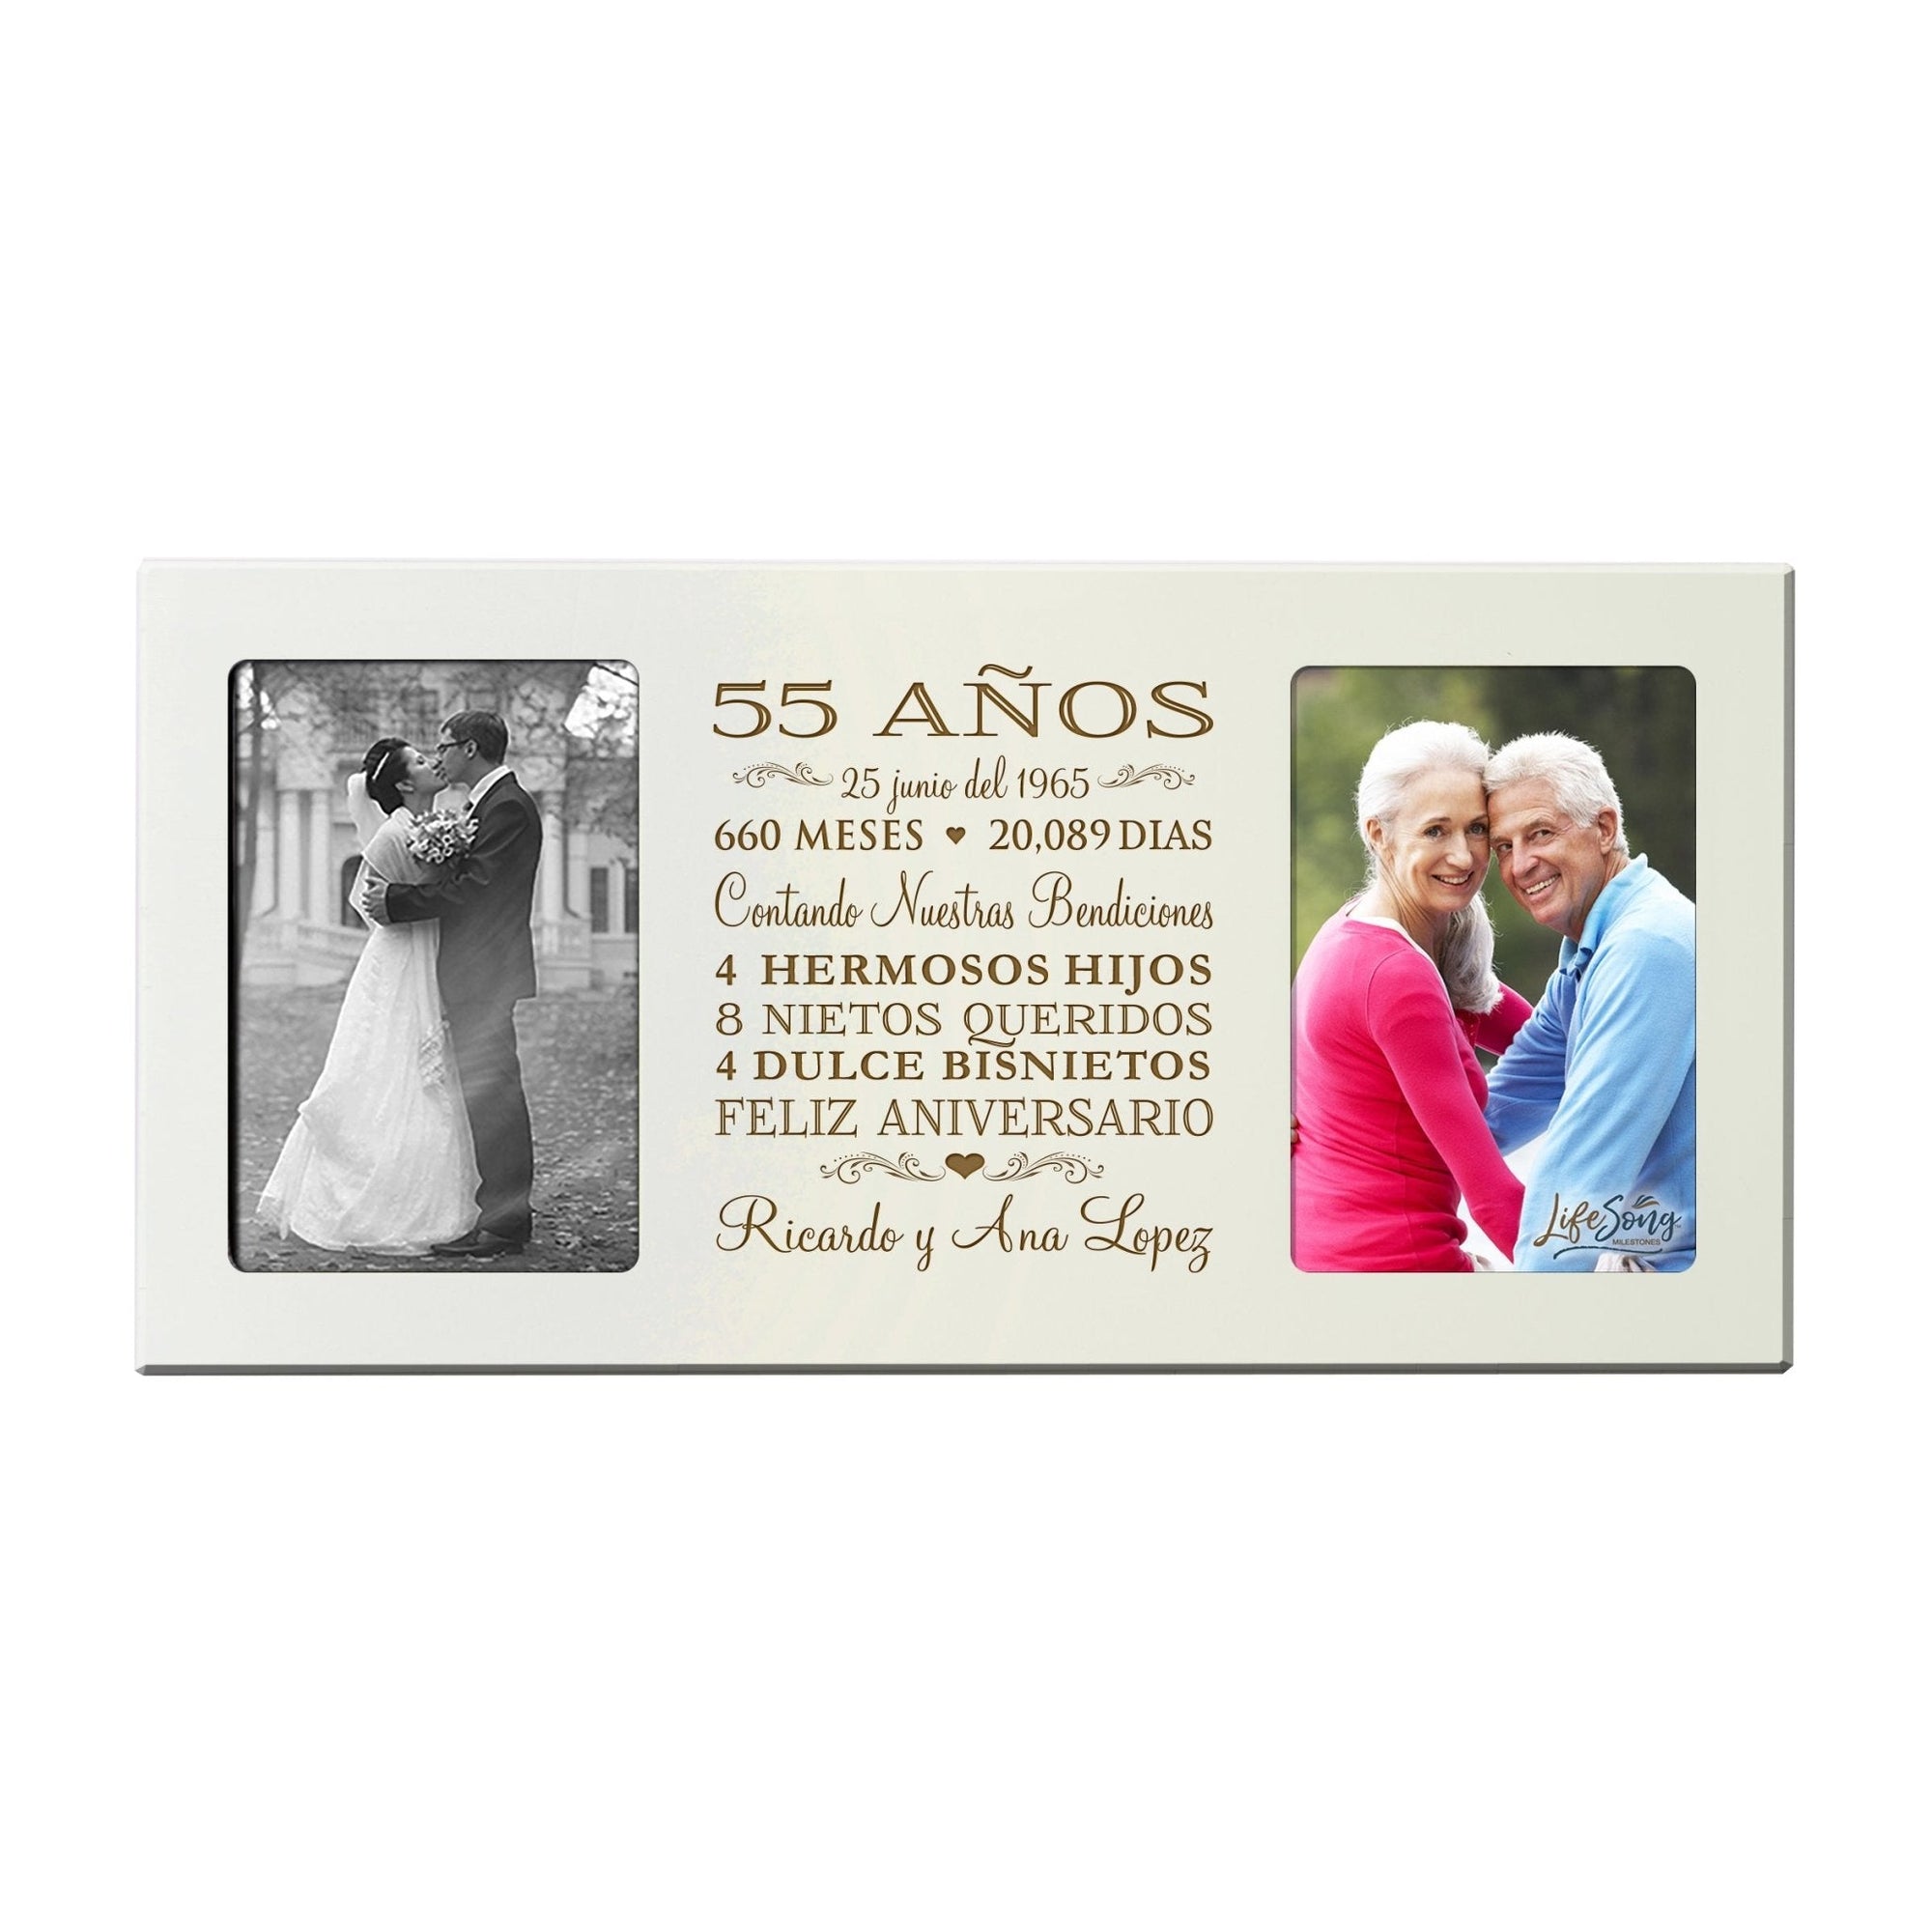 Lifesong Milestones Personalized Couples 55th Wedding Anniversary Spanish Picture Frame